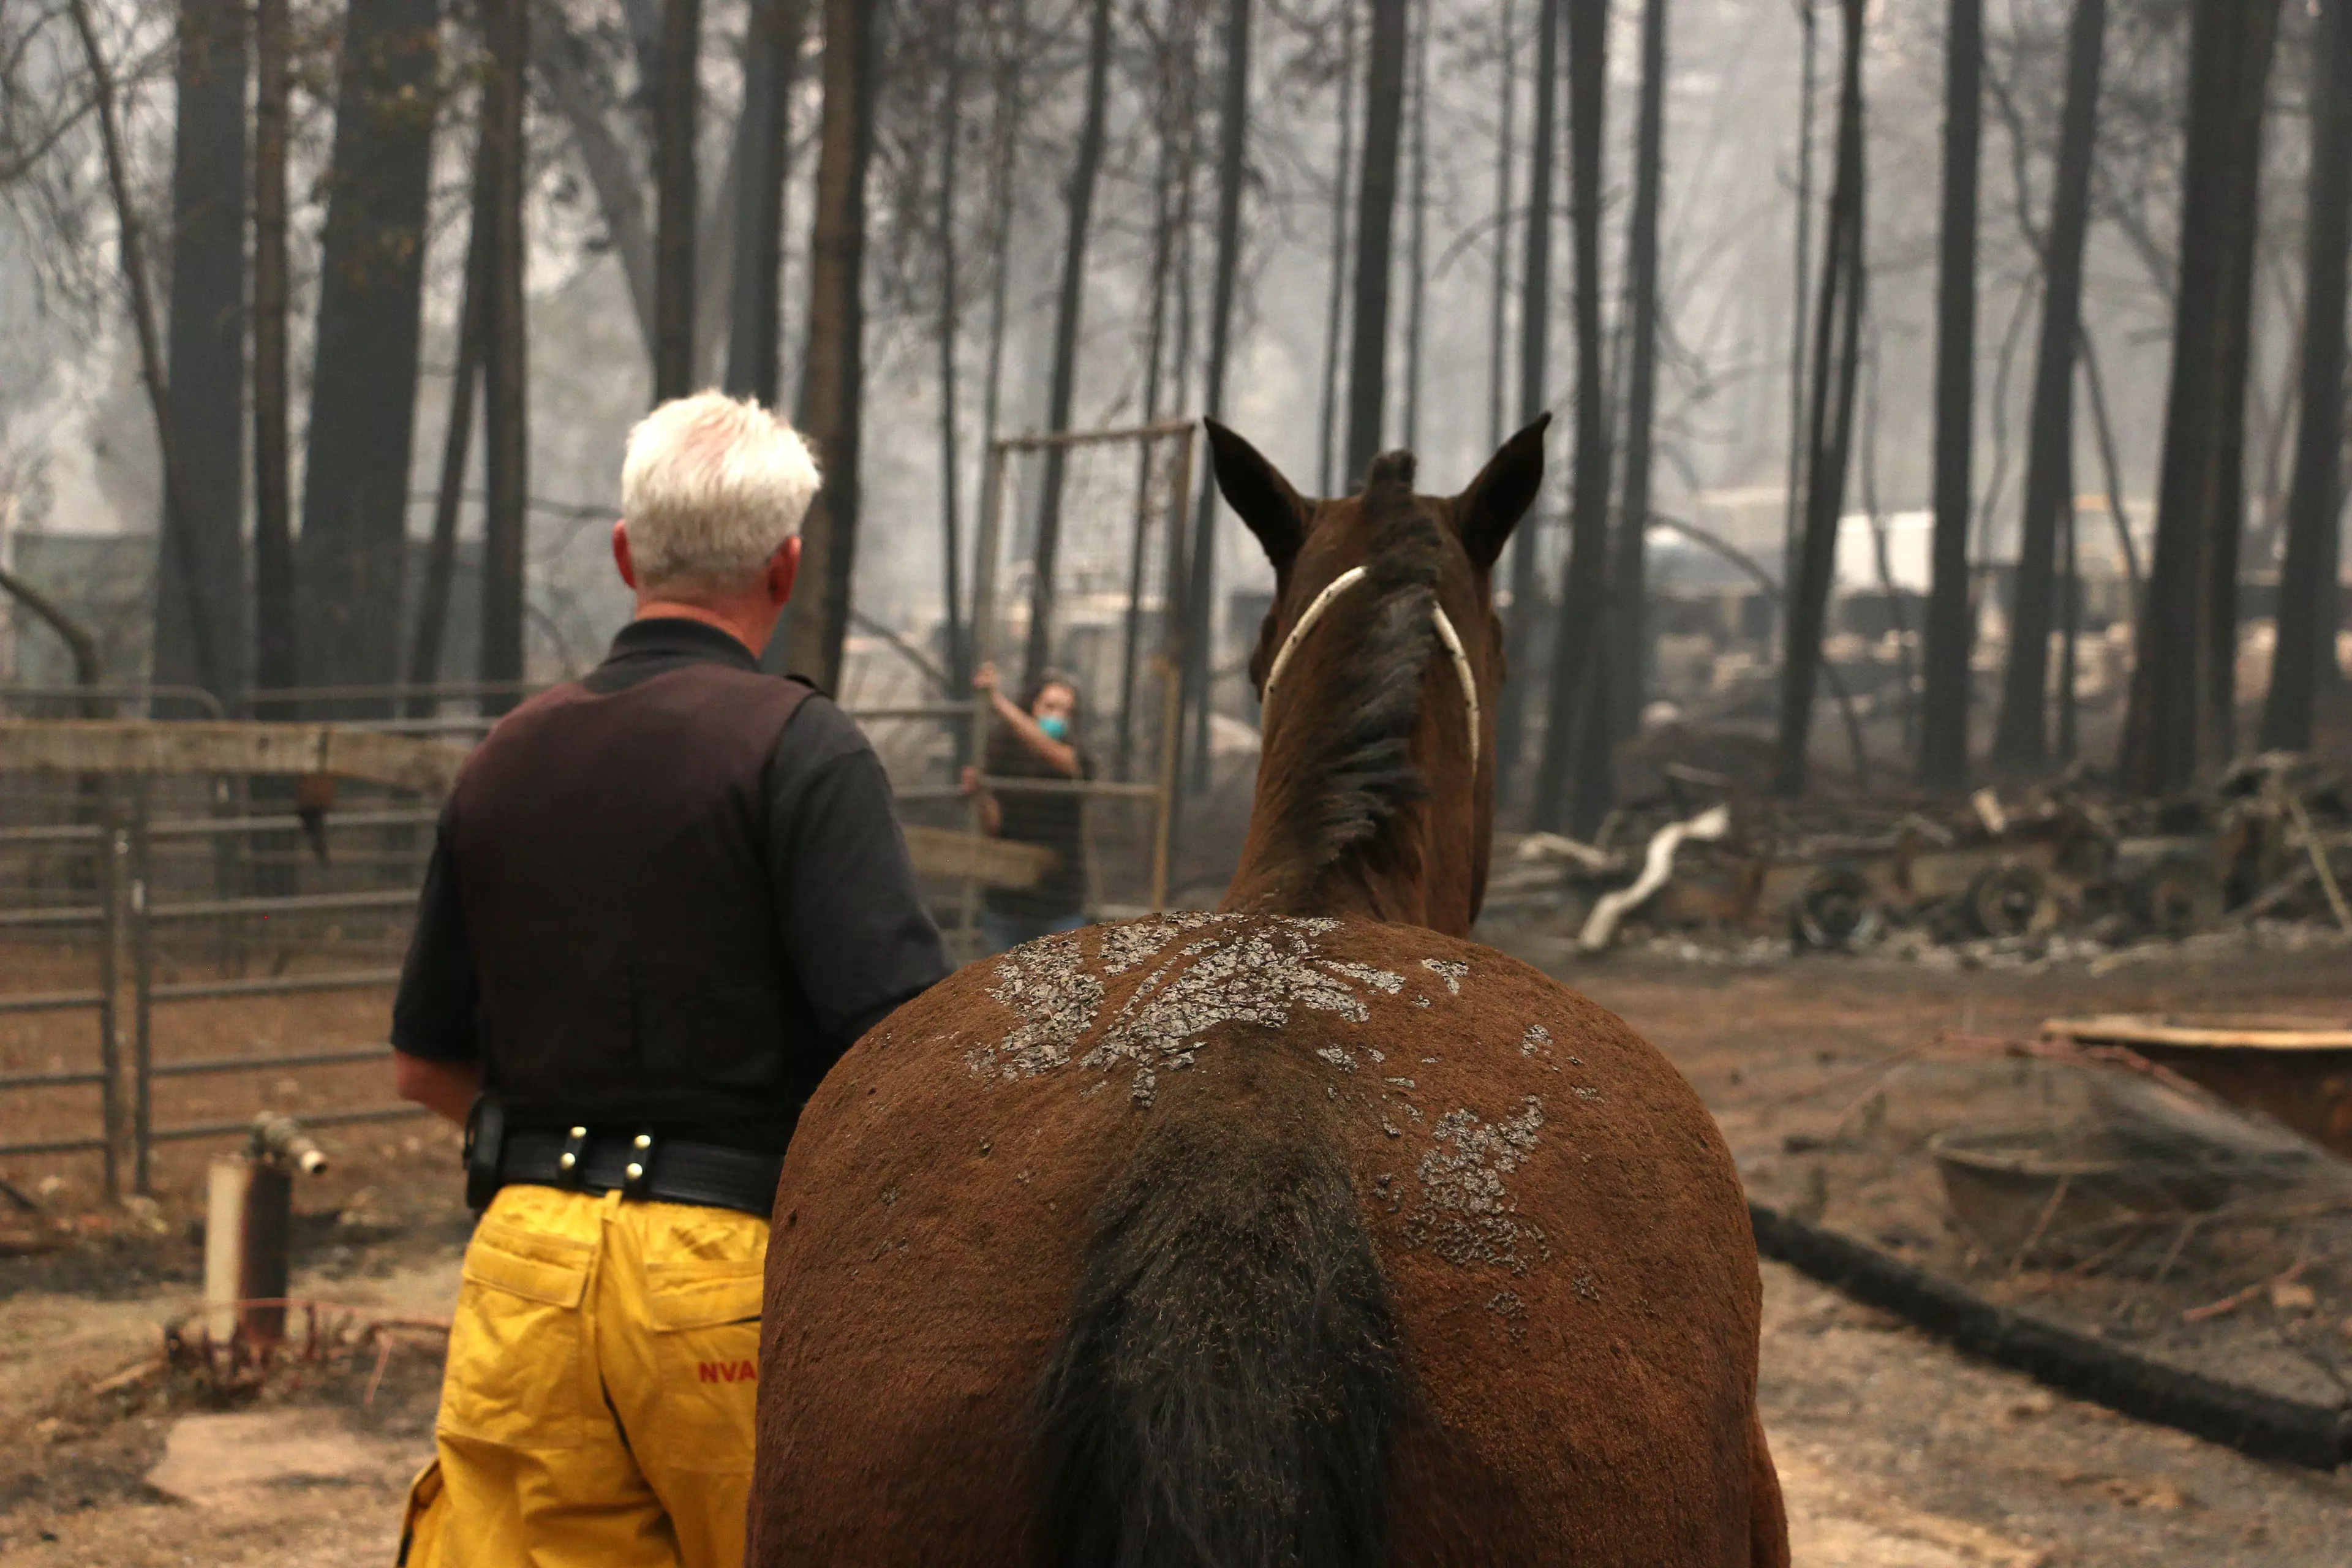 Yolo County Animal Services tends to a horse that was stranded during the fires.